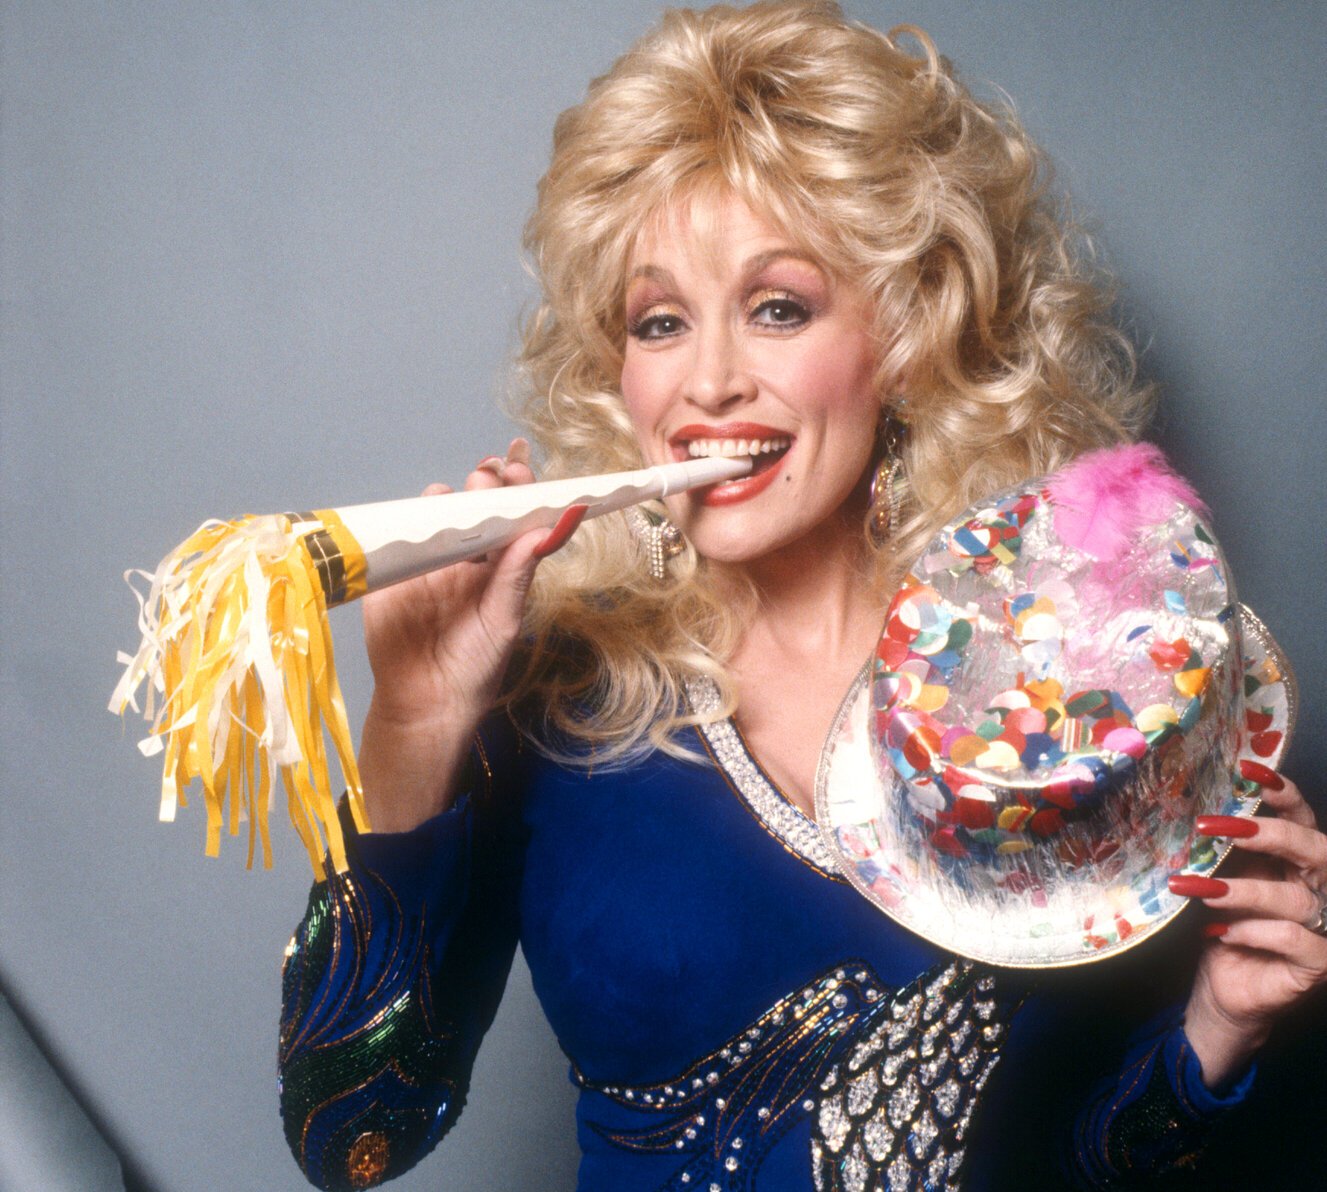 Dolly Parton with a party hat and noise maker in the 1990s.